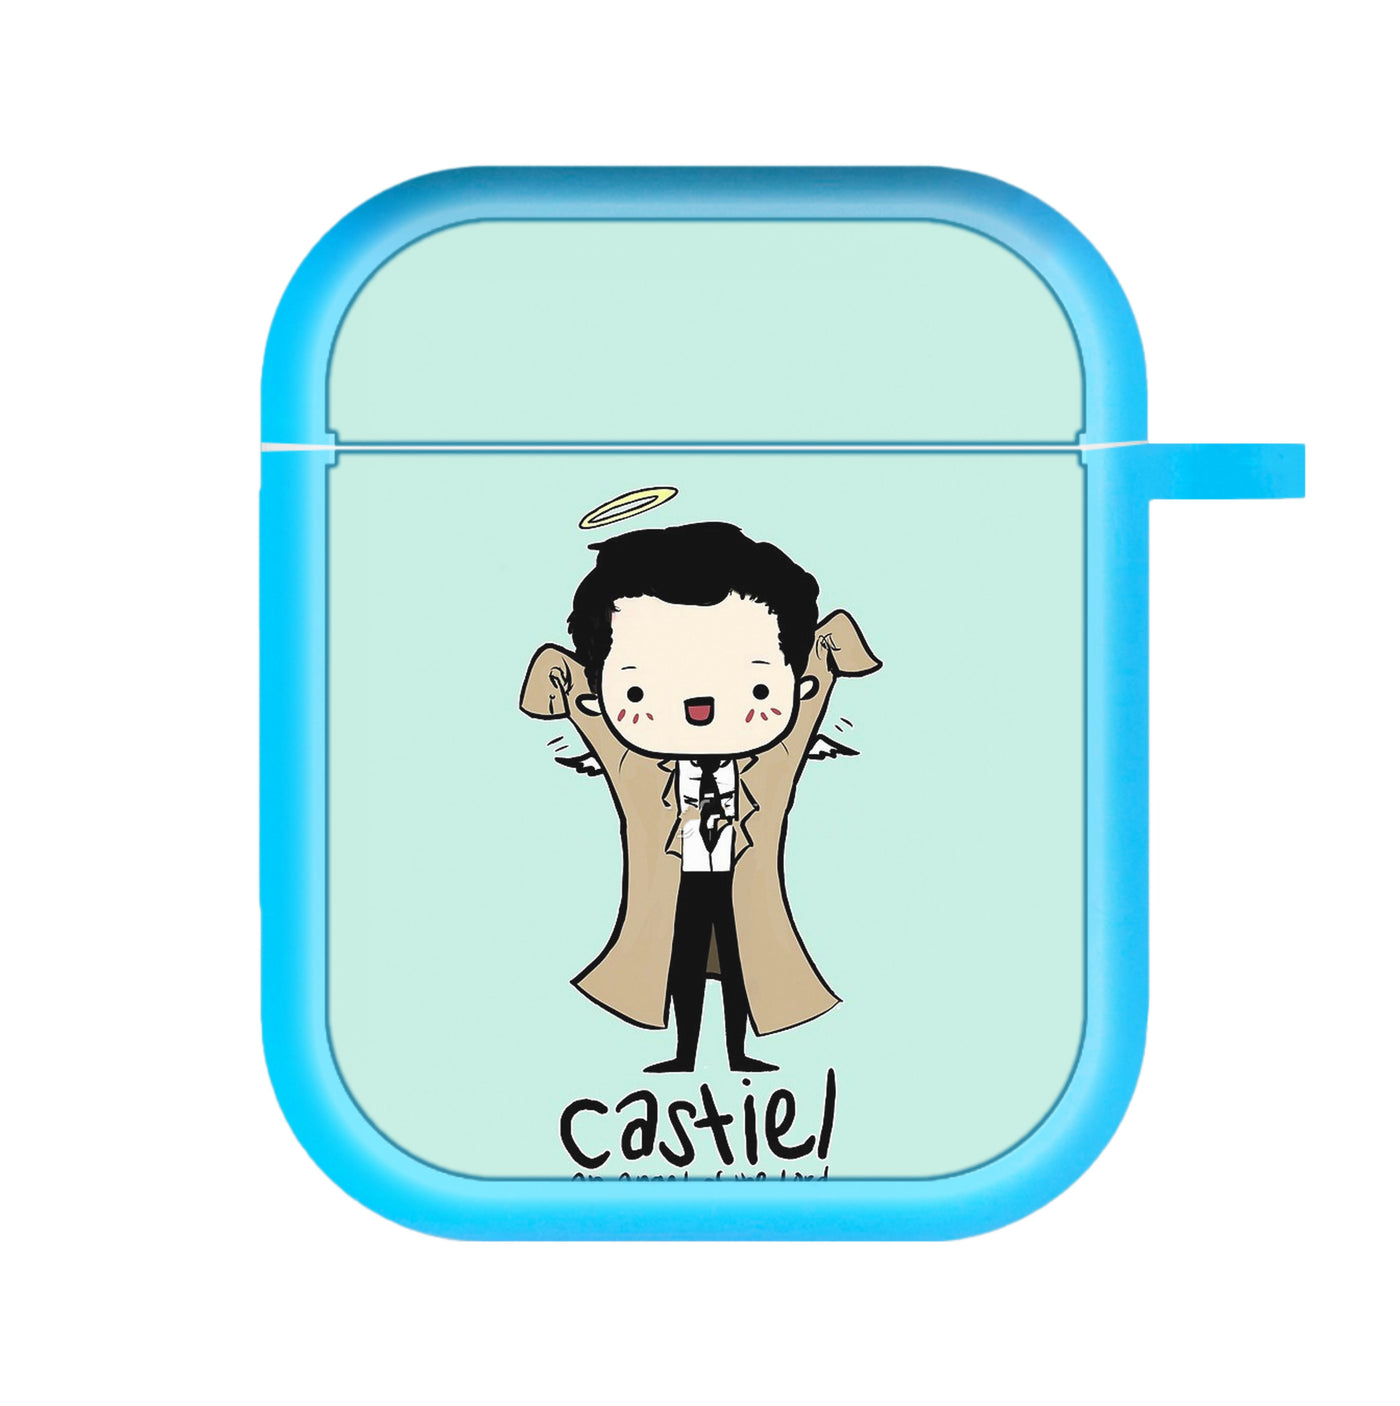 Castiel - Angel of the Lord - Supernatural AirPods Case